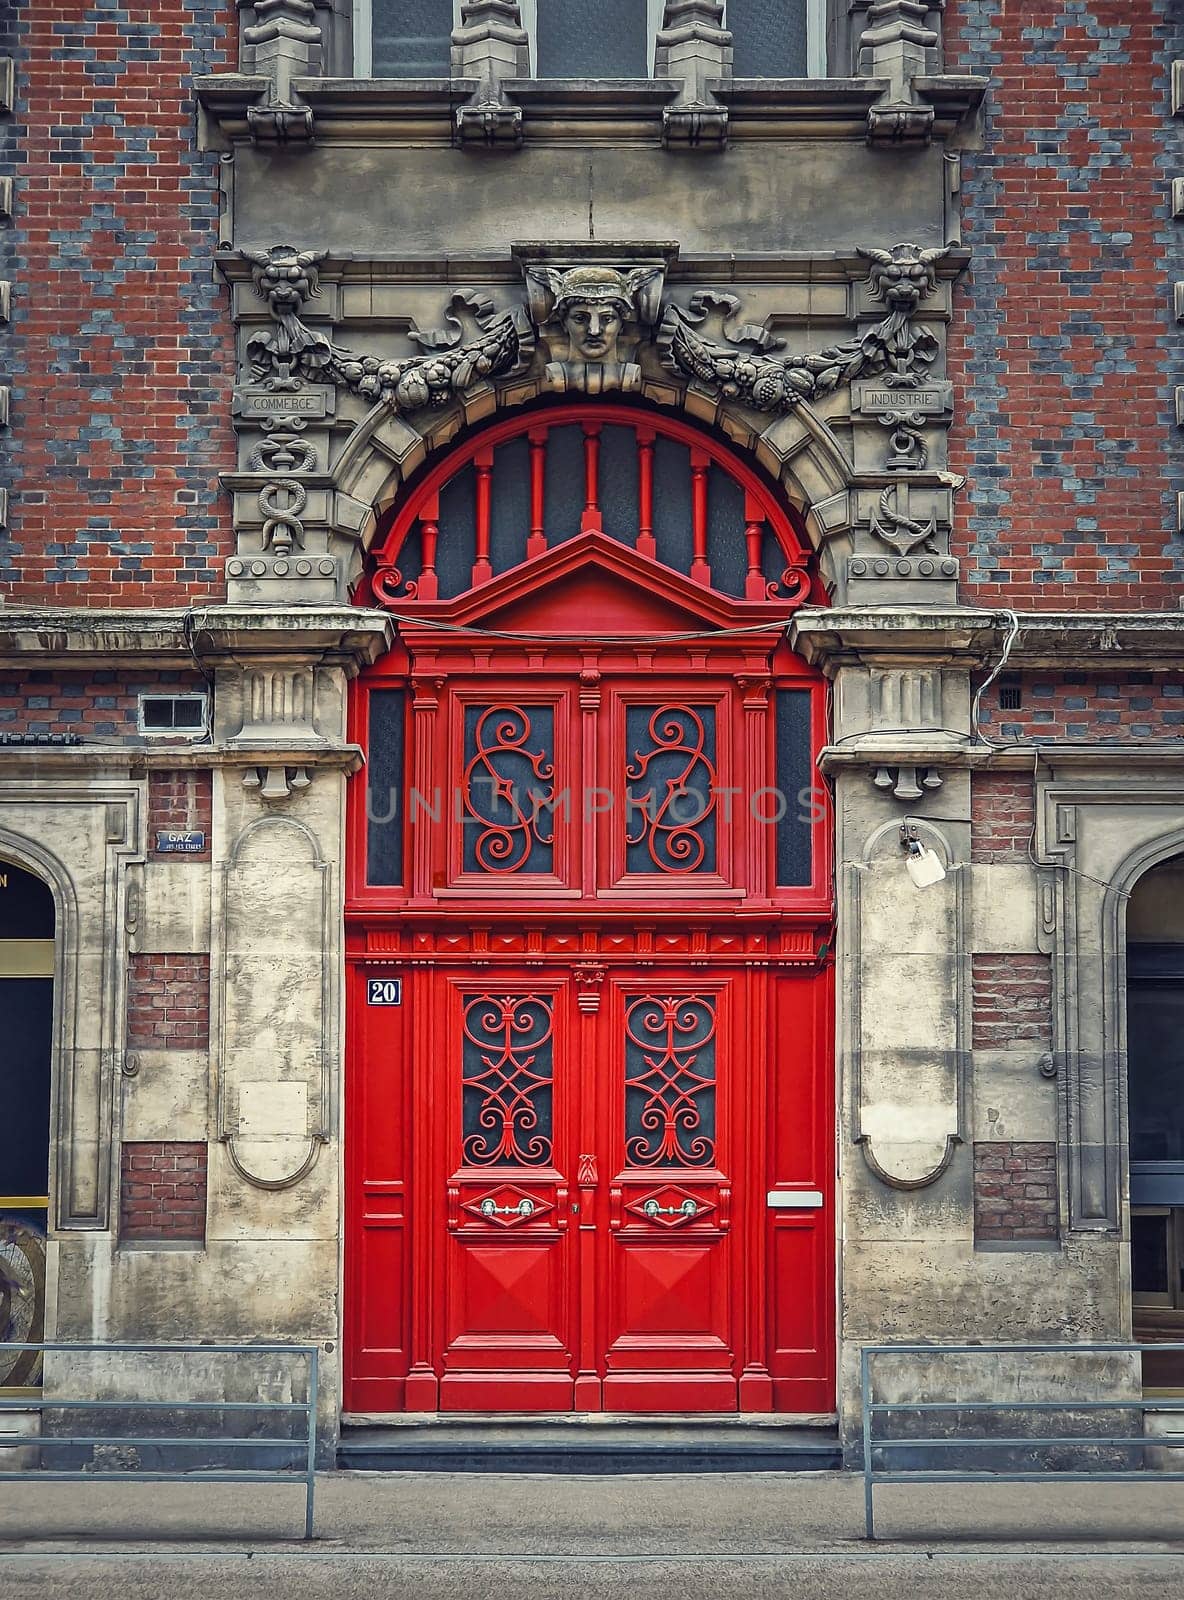 Vintage red door and ornate facade details of an old historical building in Rouen, France. Rustic outdoors architecture elements, big wooden gate as main entrance